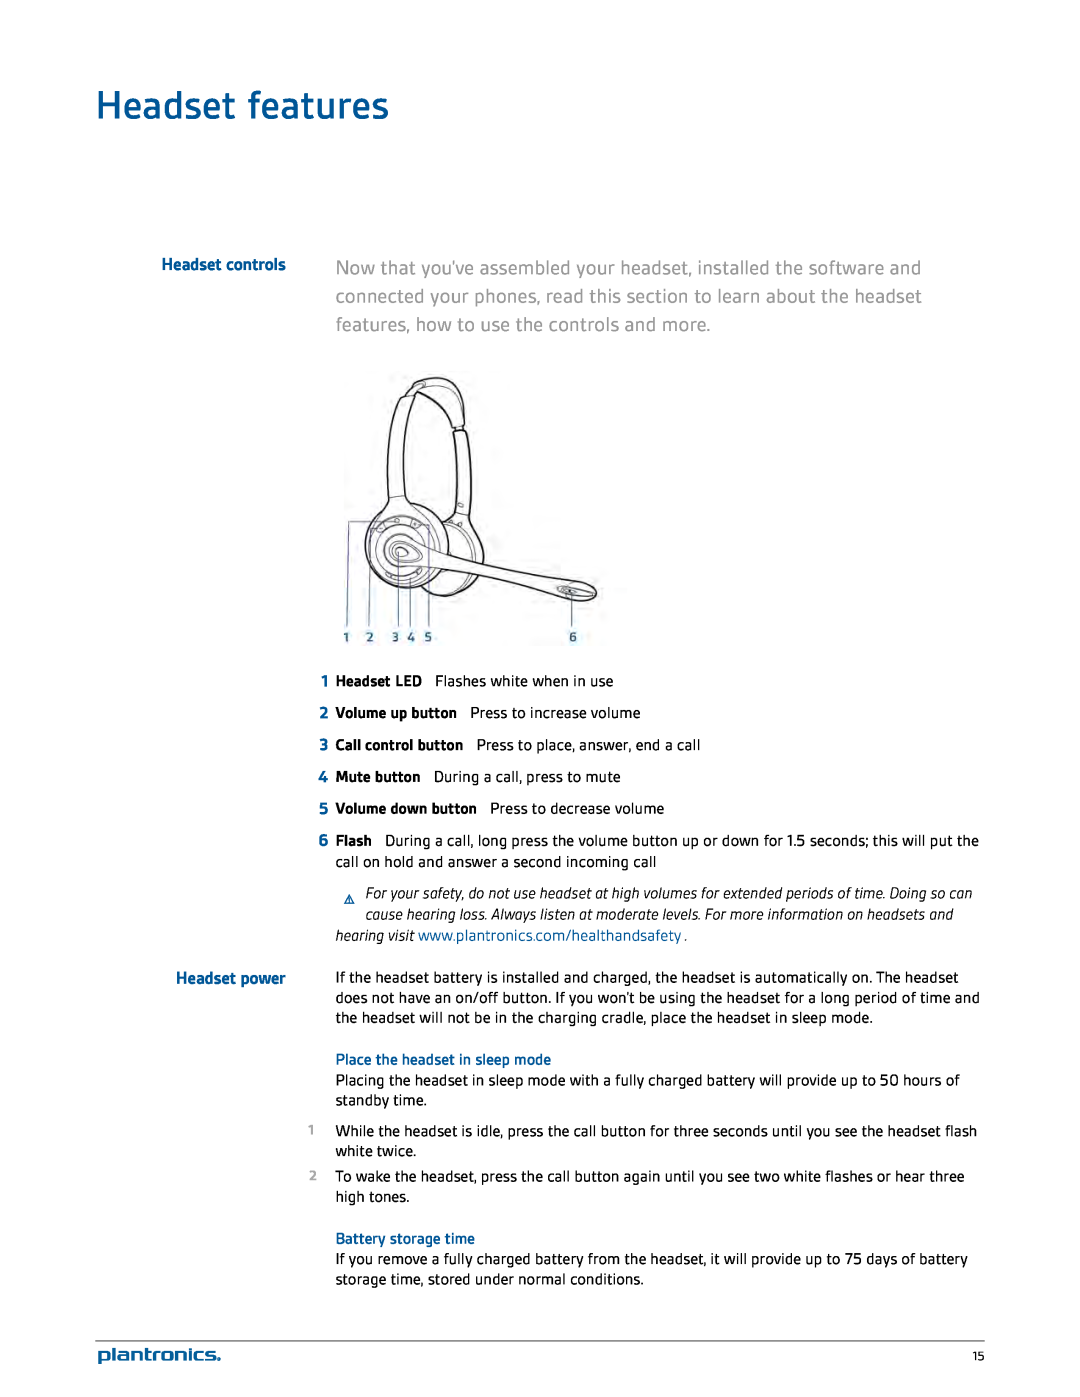 Plantronics W720A-M, W710A-M manual Headset features, Headset power, Place the headset in sleep mode, Battery storage time 